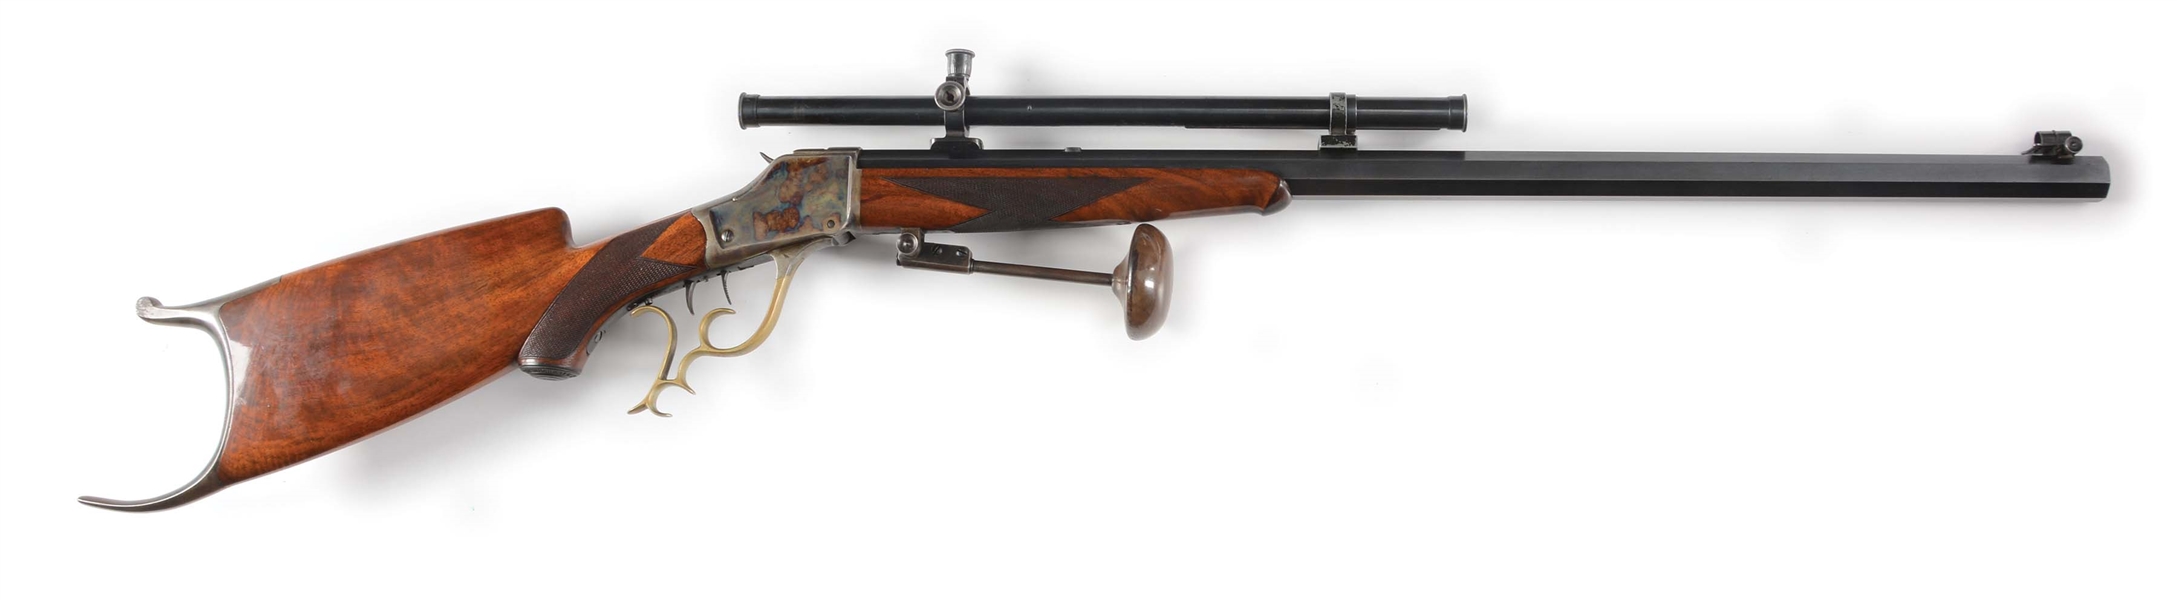 (A) WINCHESTER HIGH WALL SCHUETZEN RIFLE WITH CASE COLORED ACTION AND SCOPE.